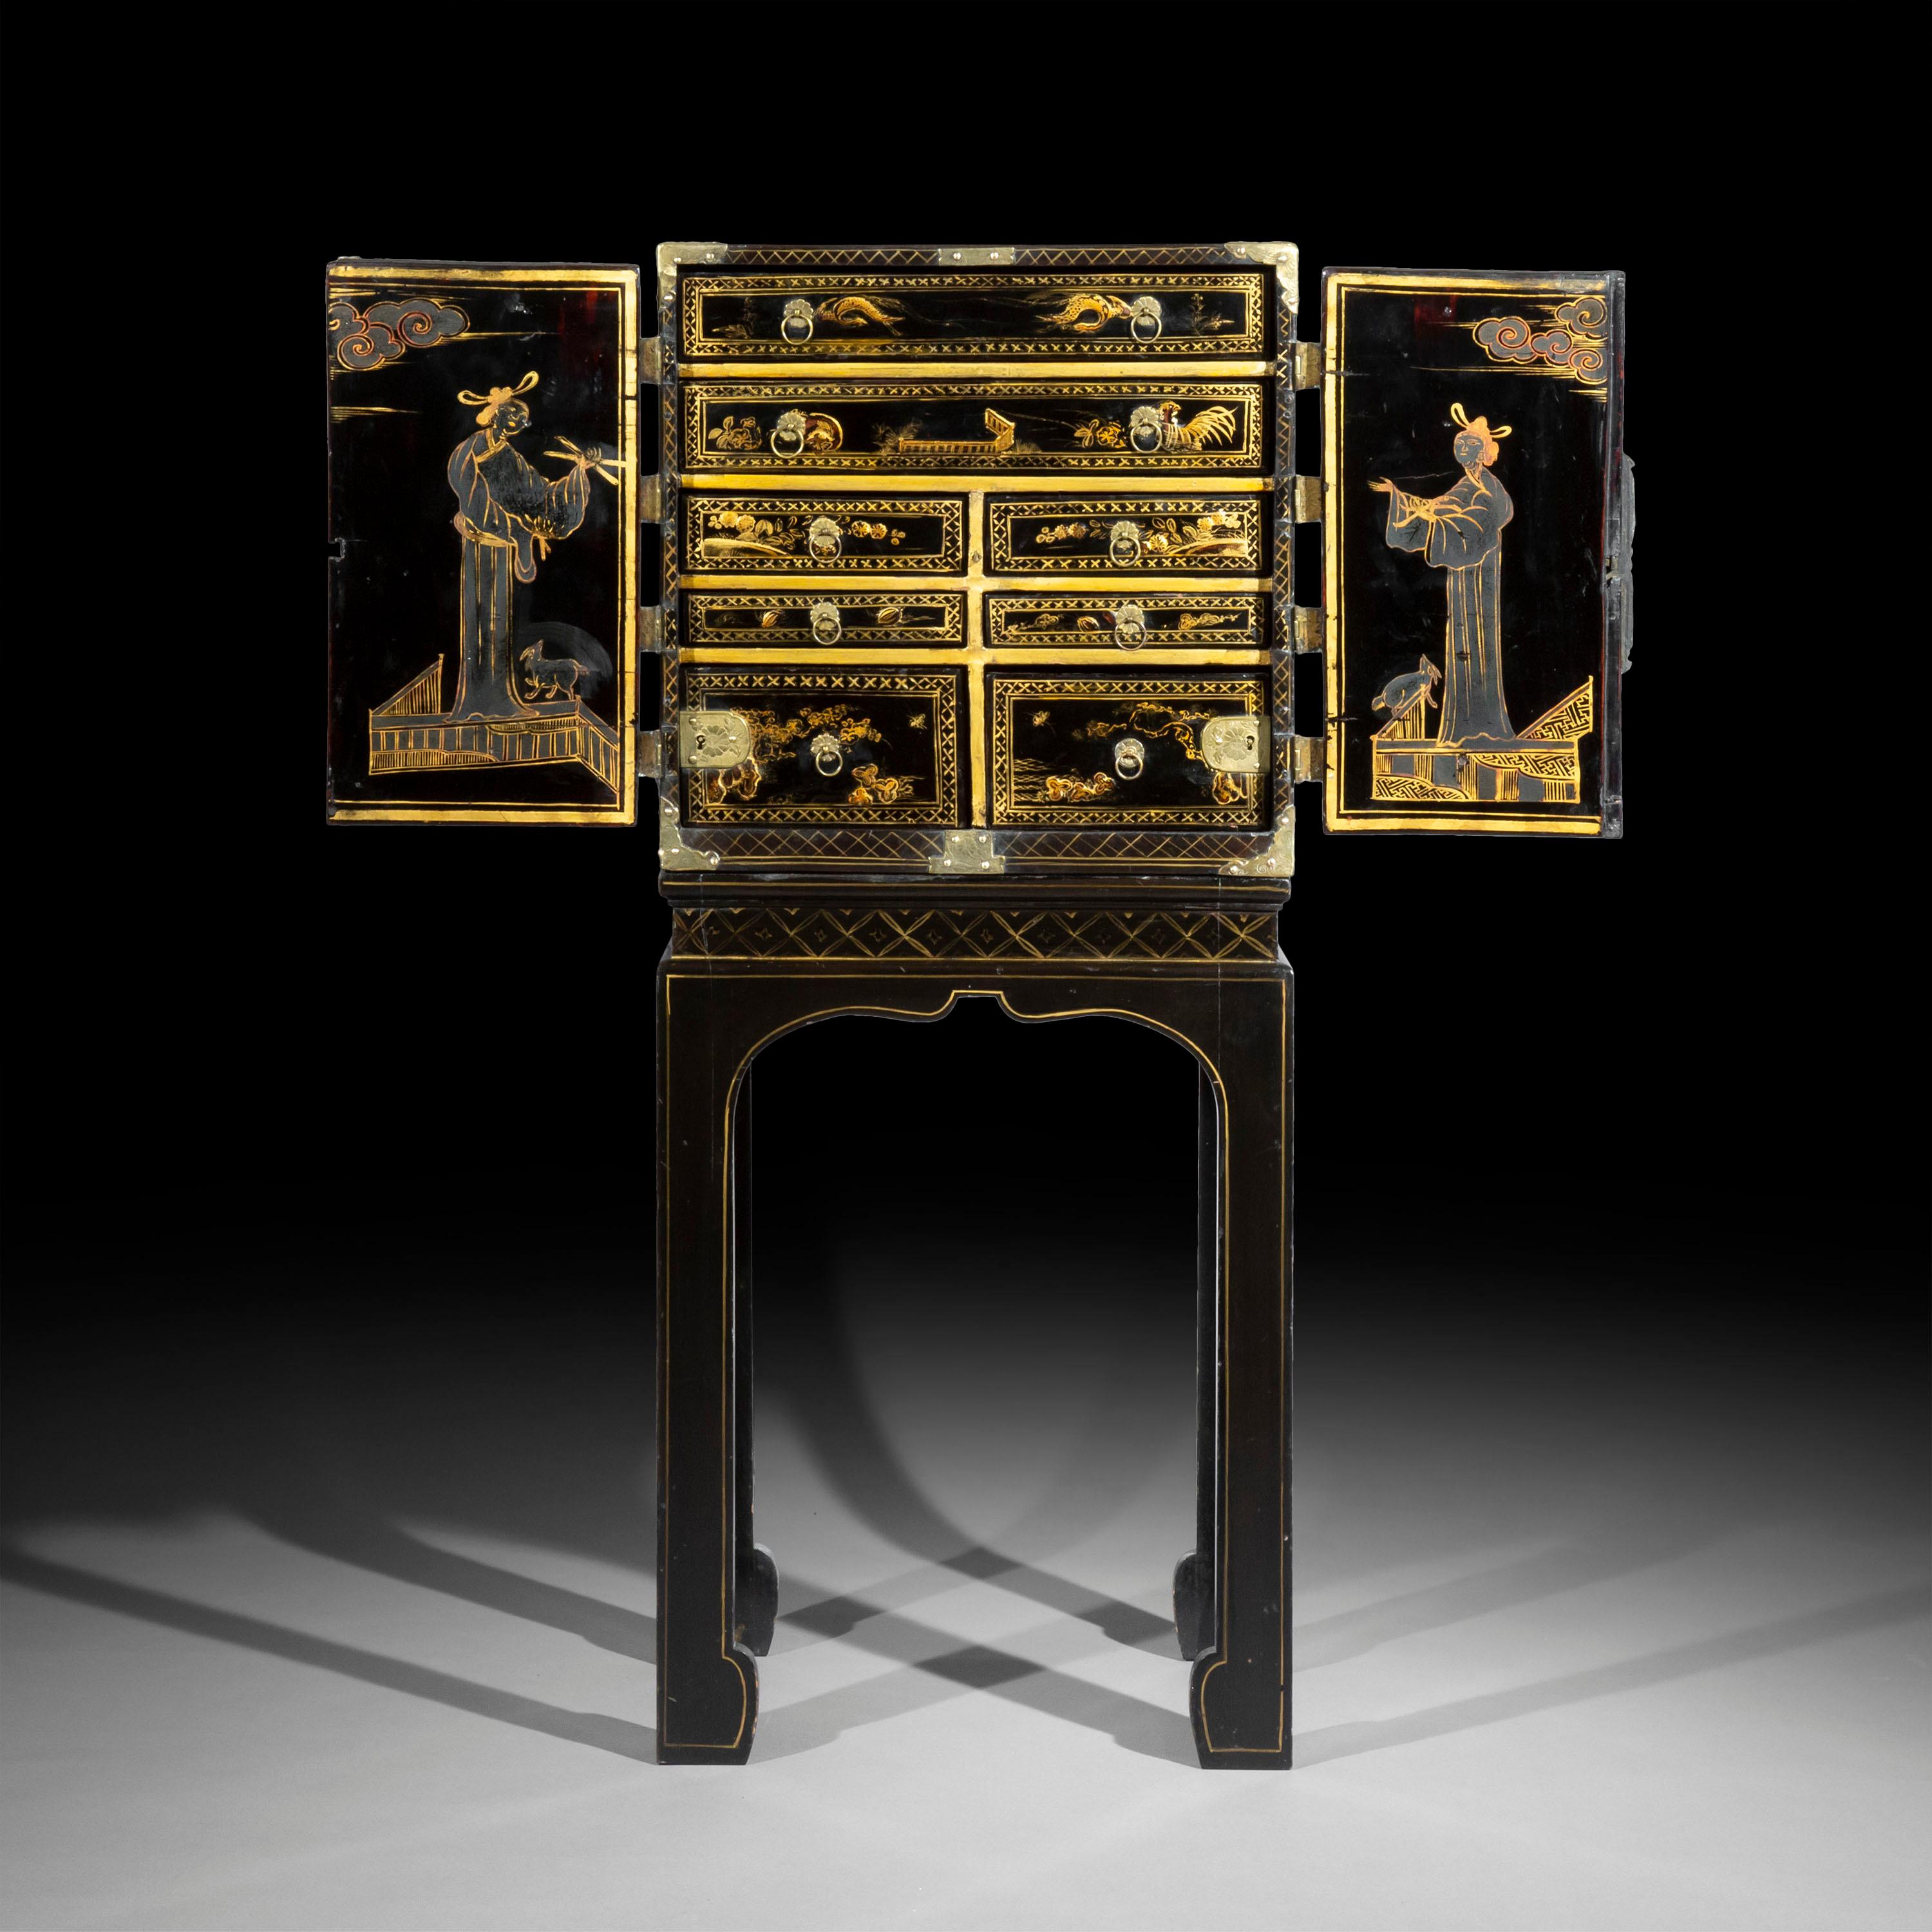 A superbly decorative Chinese export black lacquer cabinet of small proportions, exquisitely decorated with figures and birds throughout.
Qing dynasty, 19th century.

A very decorative accent piece, it is also useful for storage of small items or